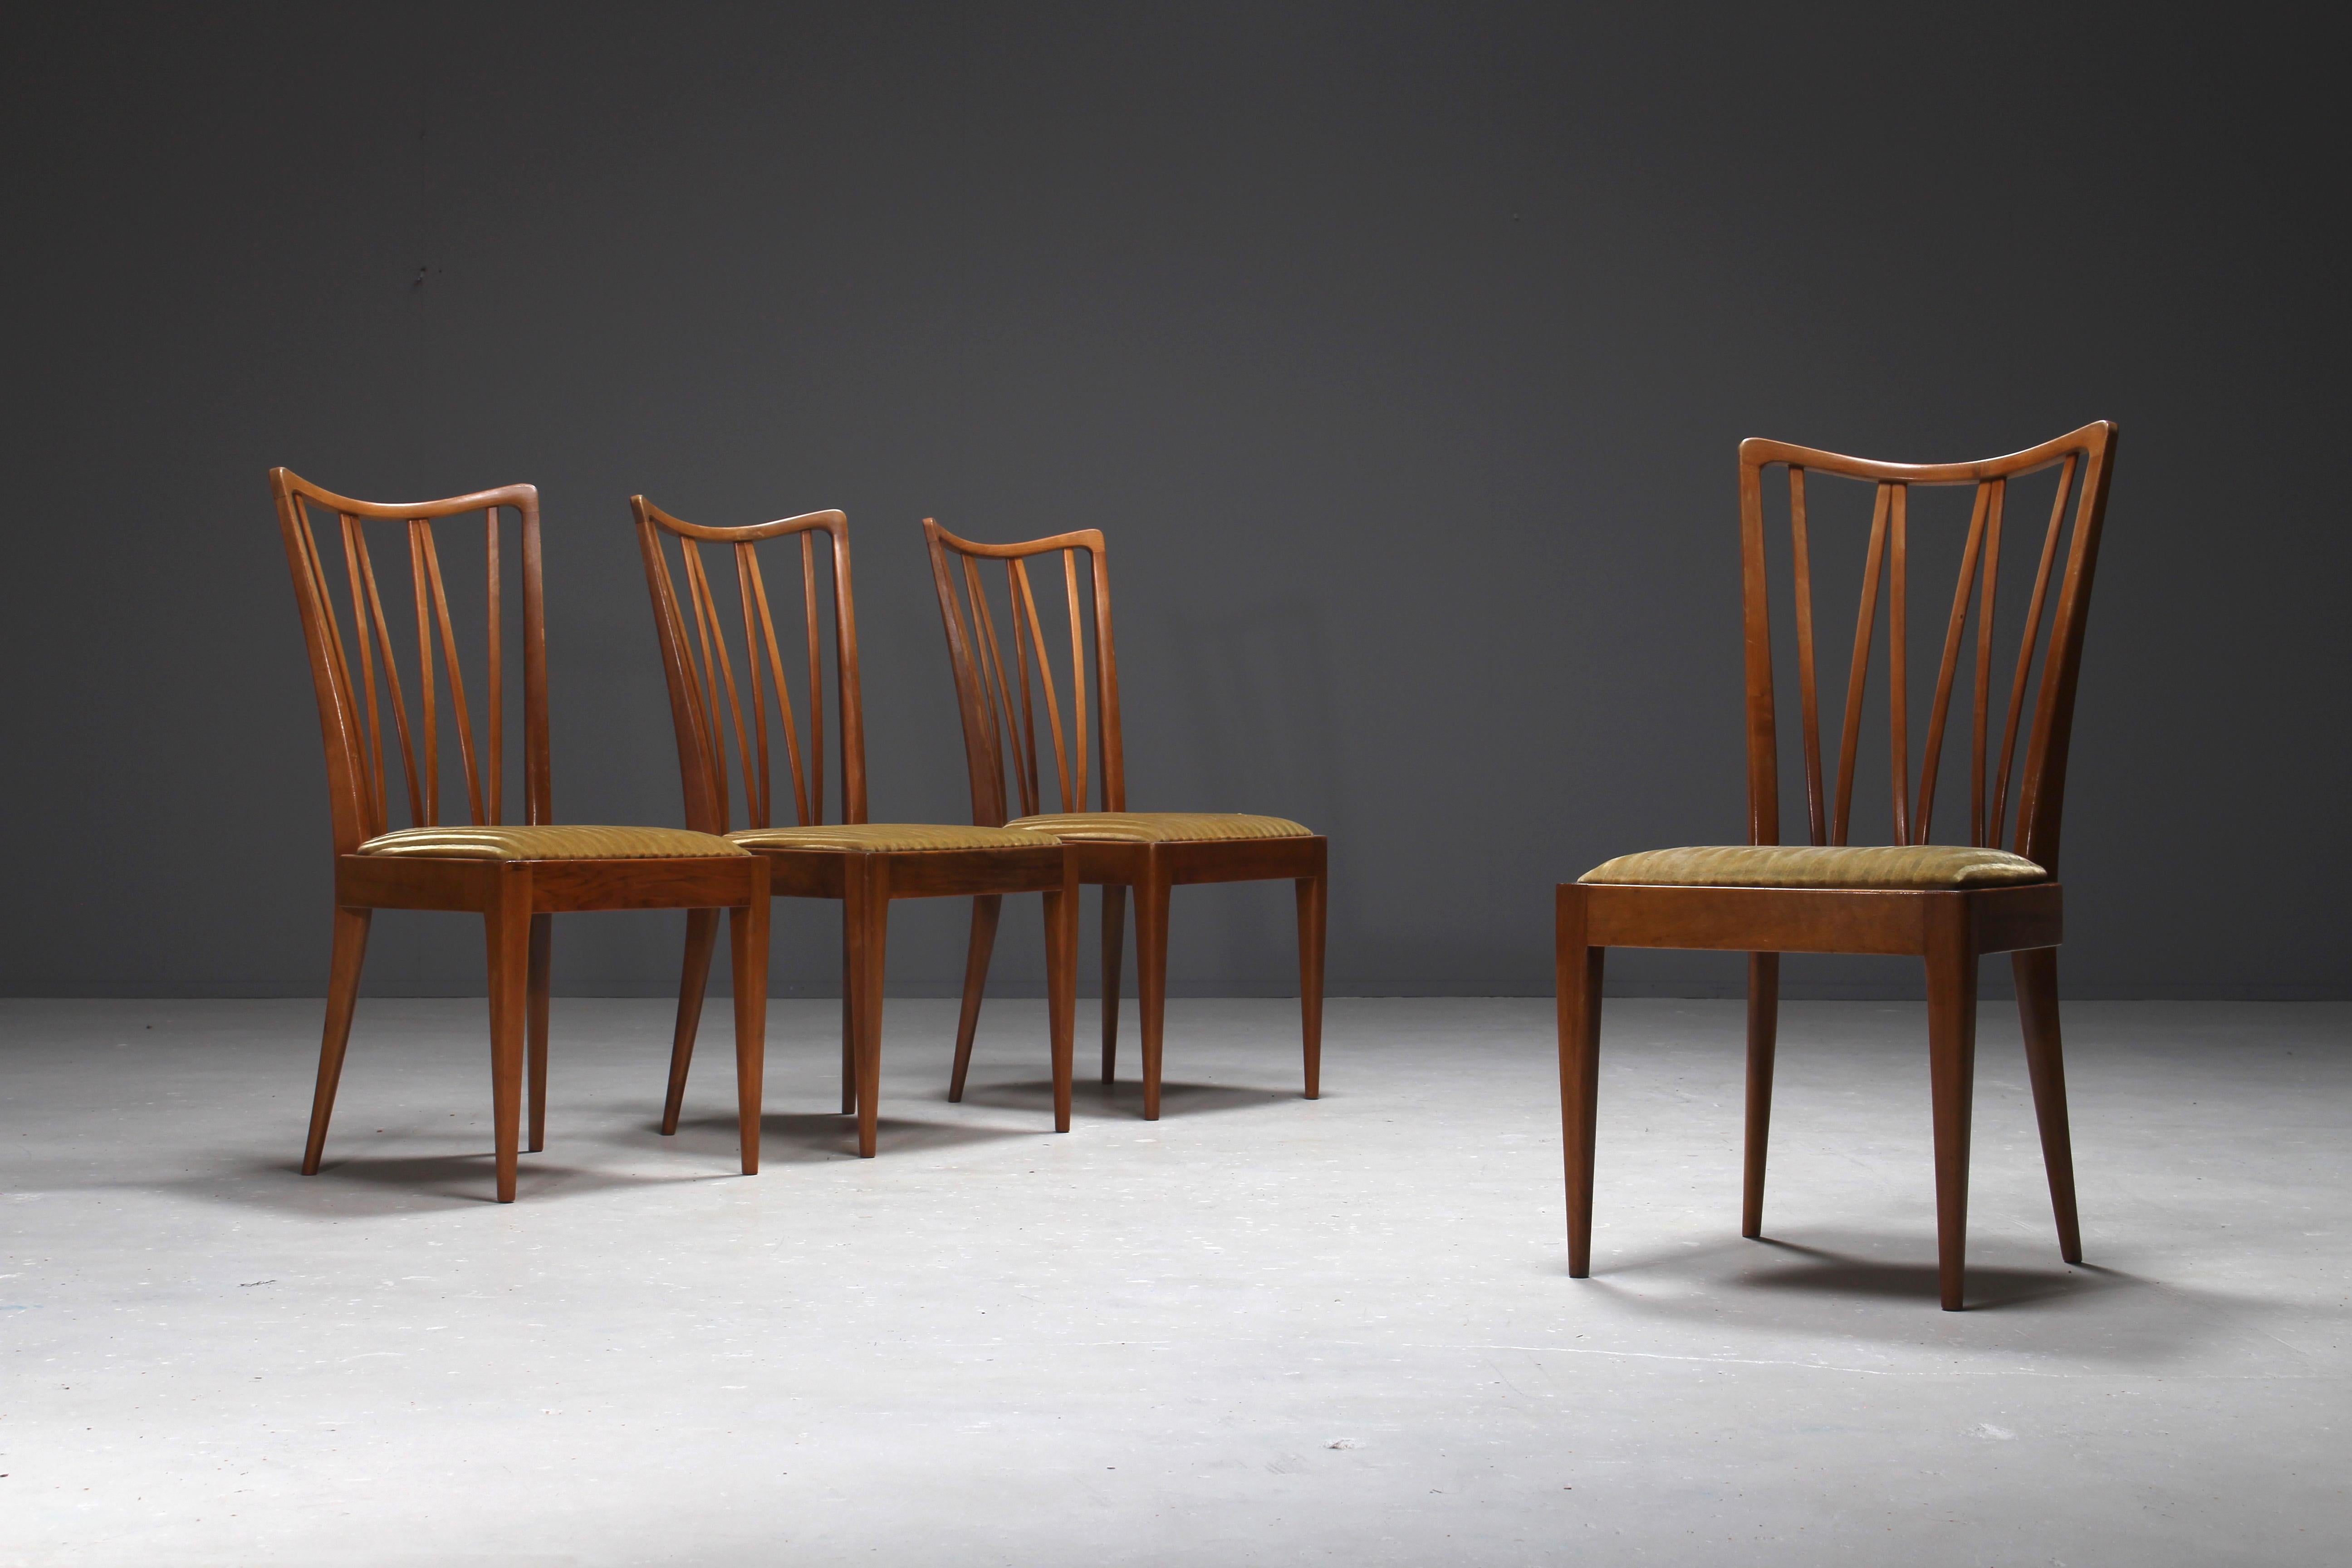 Set of four dining chairs designed by Abraham A. Patijn for Zijlstra Furniture in the Netherlands.
The chairs are made out of walnut and are upholstered with the original velvet.
This design is similar with chairs from Ole Wanscher, Paolo Buffa